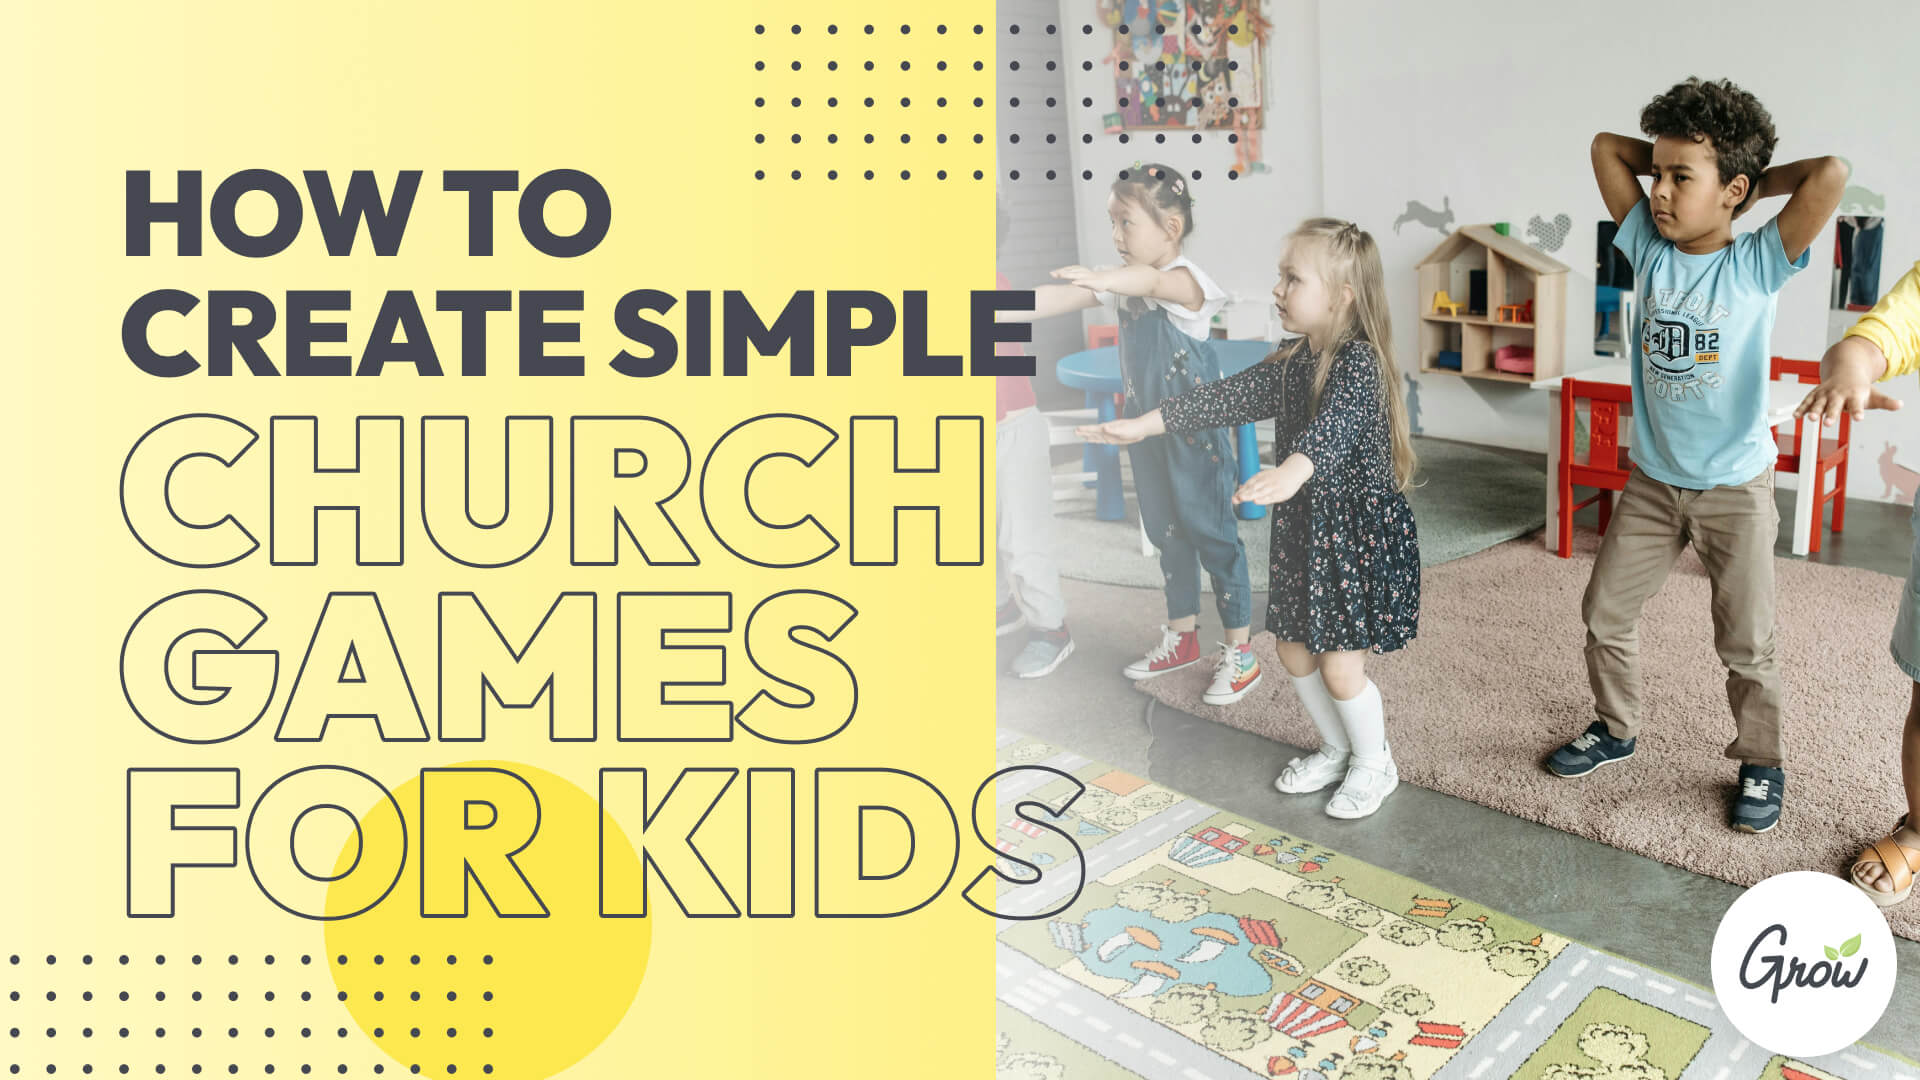 How to Create Simple Church Games for Kids